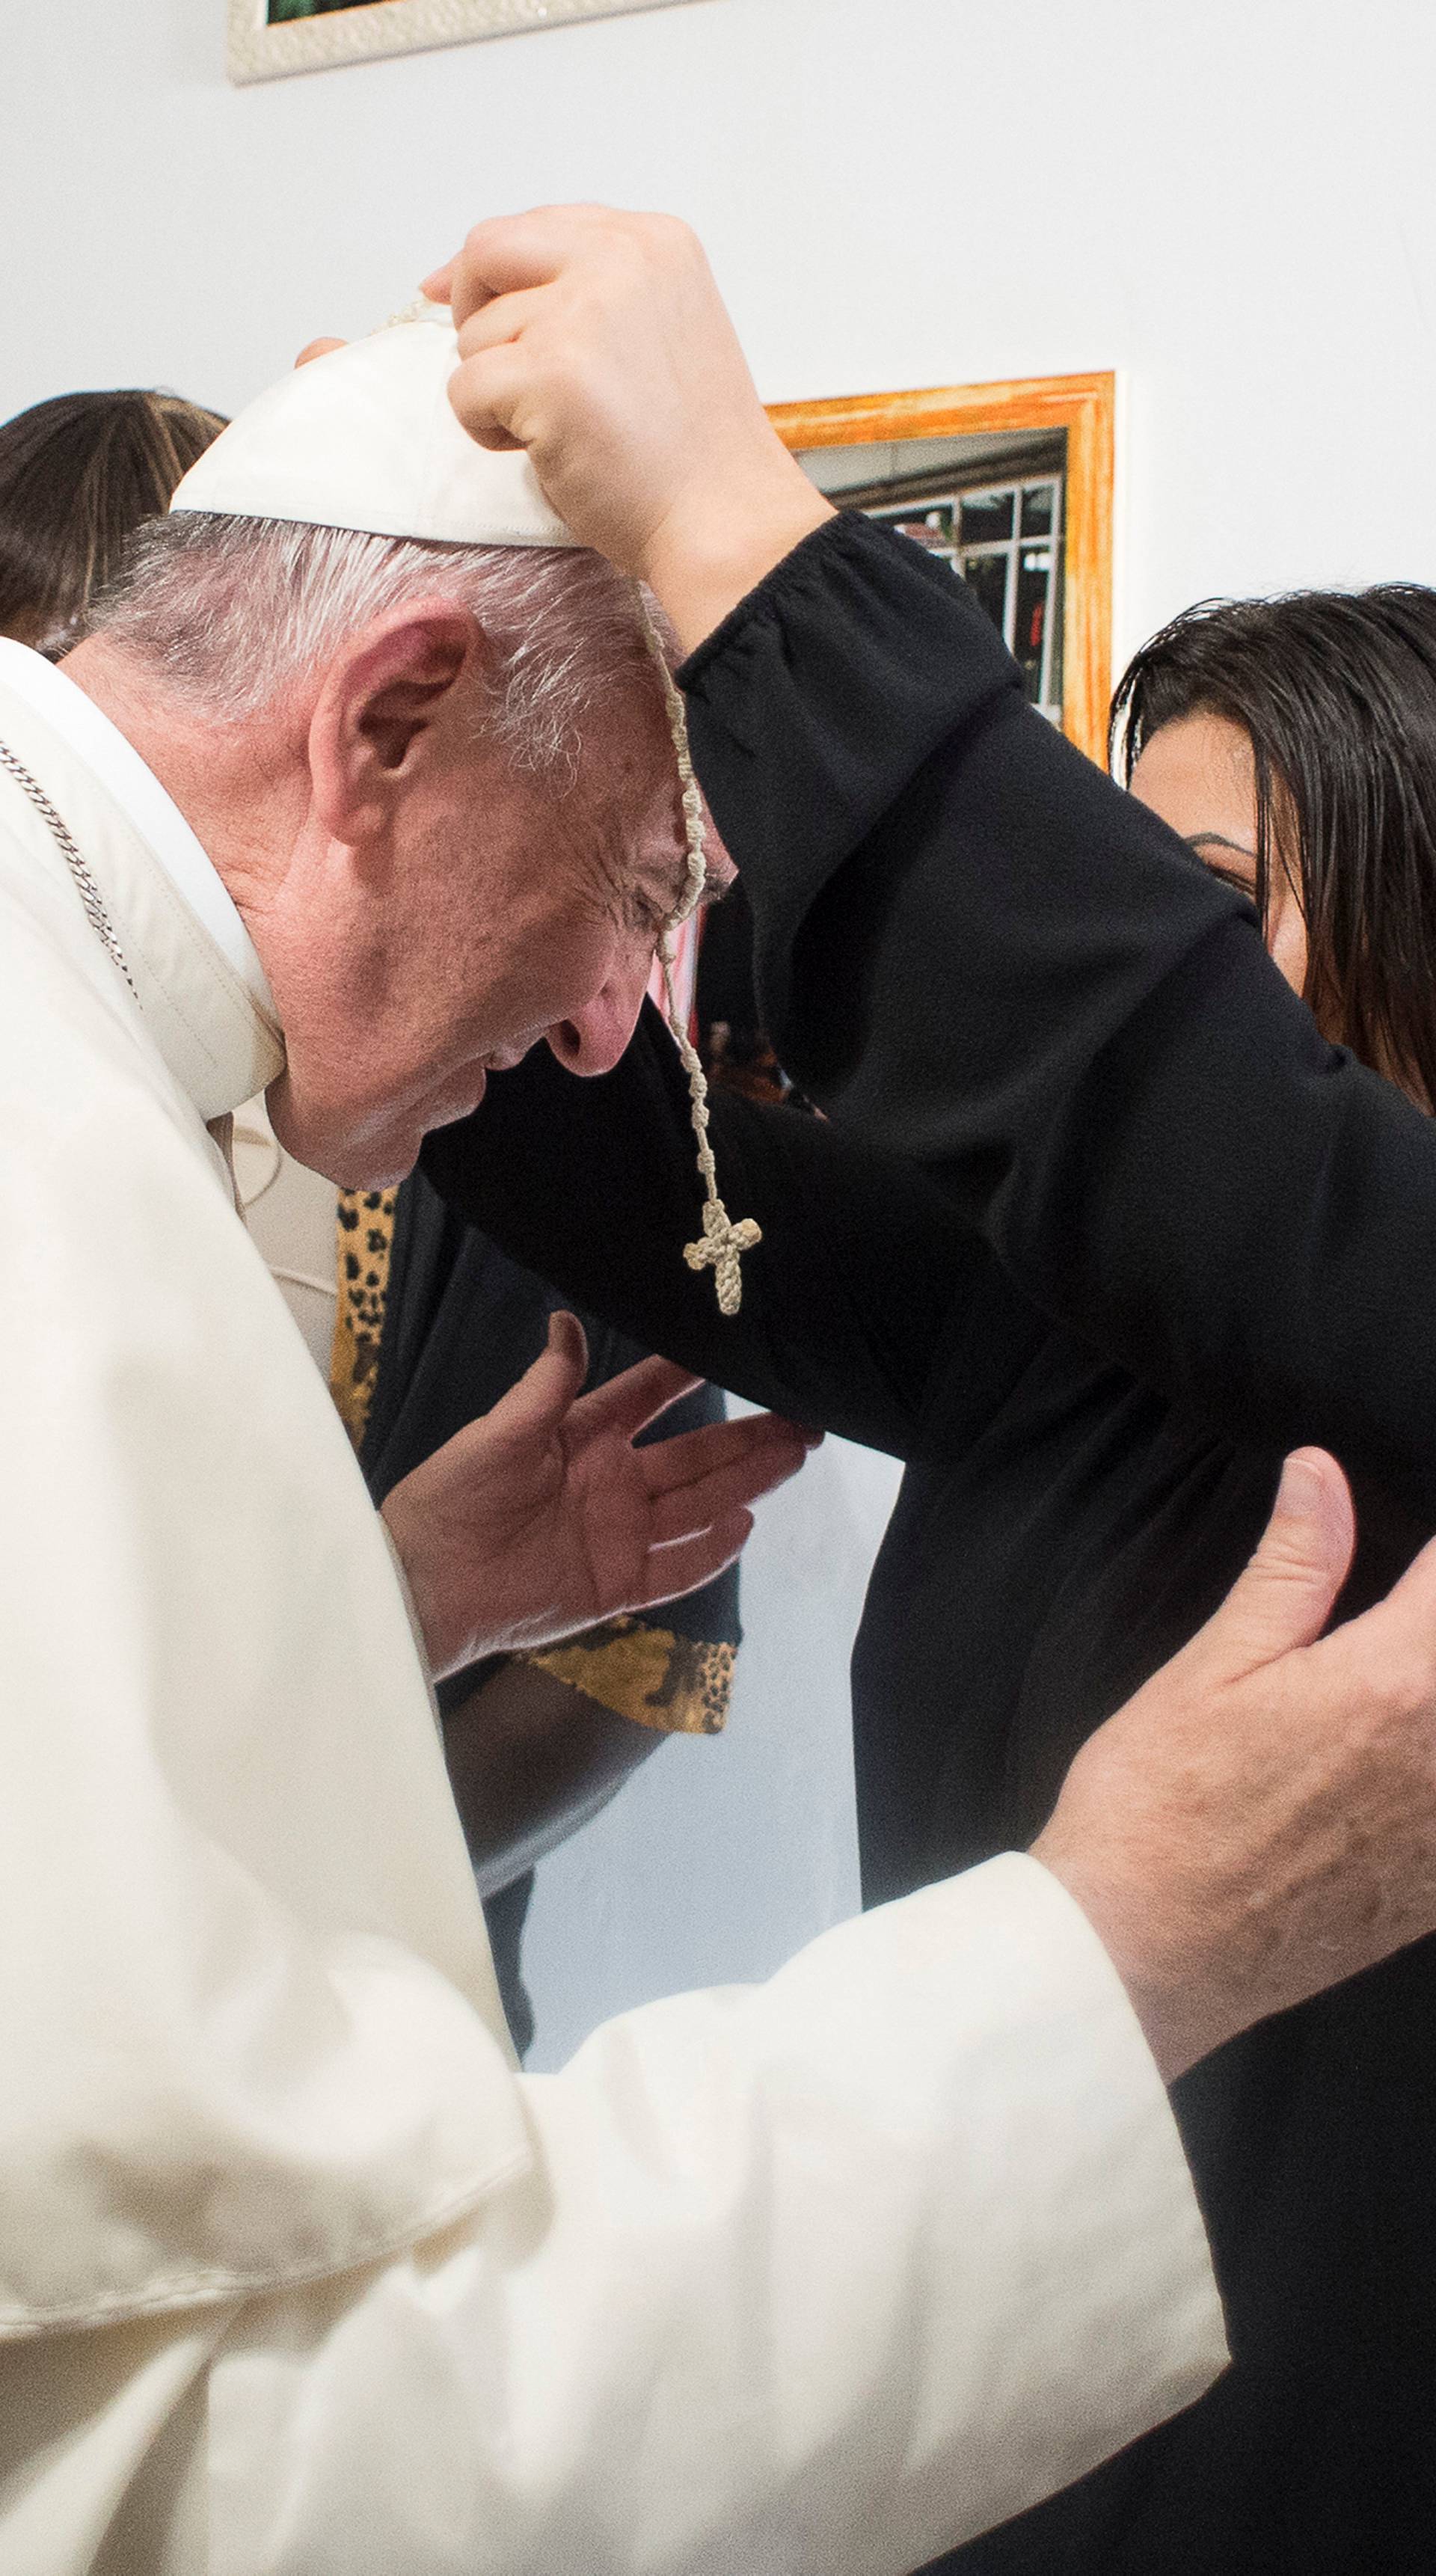 Pope Francis receives a crucifix as a gift from a member of the Pope John XXIII community in Rome